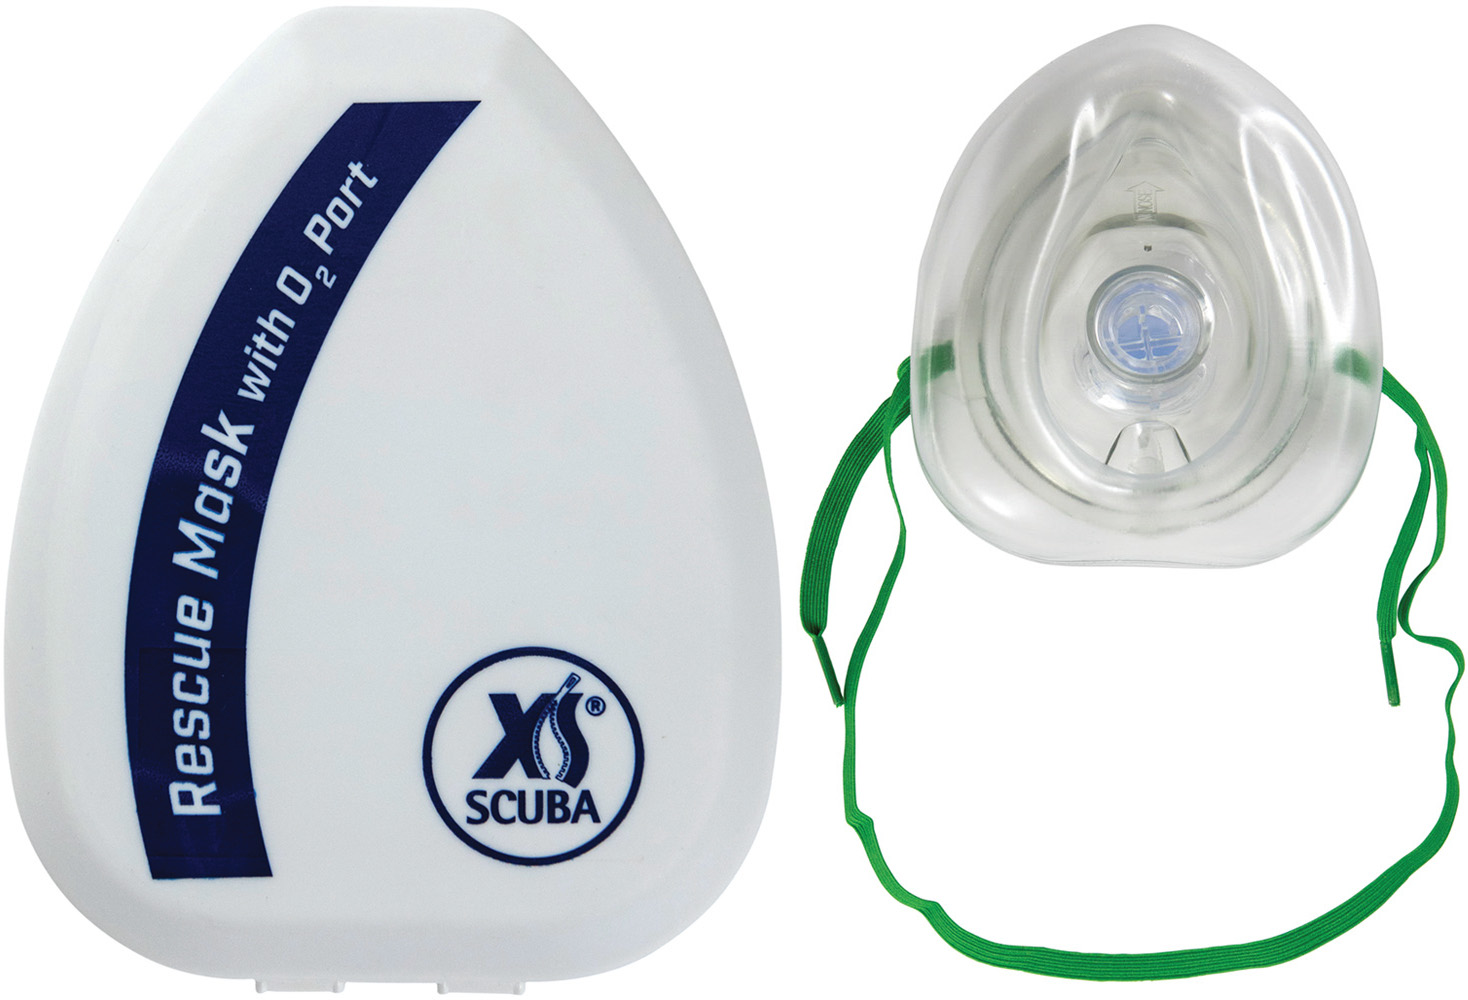 XS Scuba Pocket Rescue Mask with Case